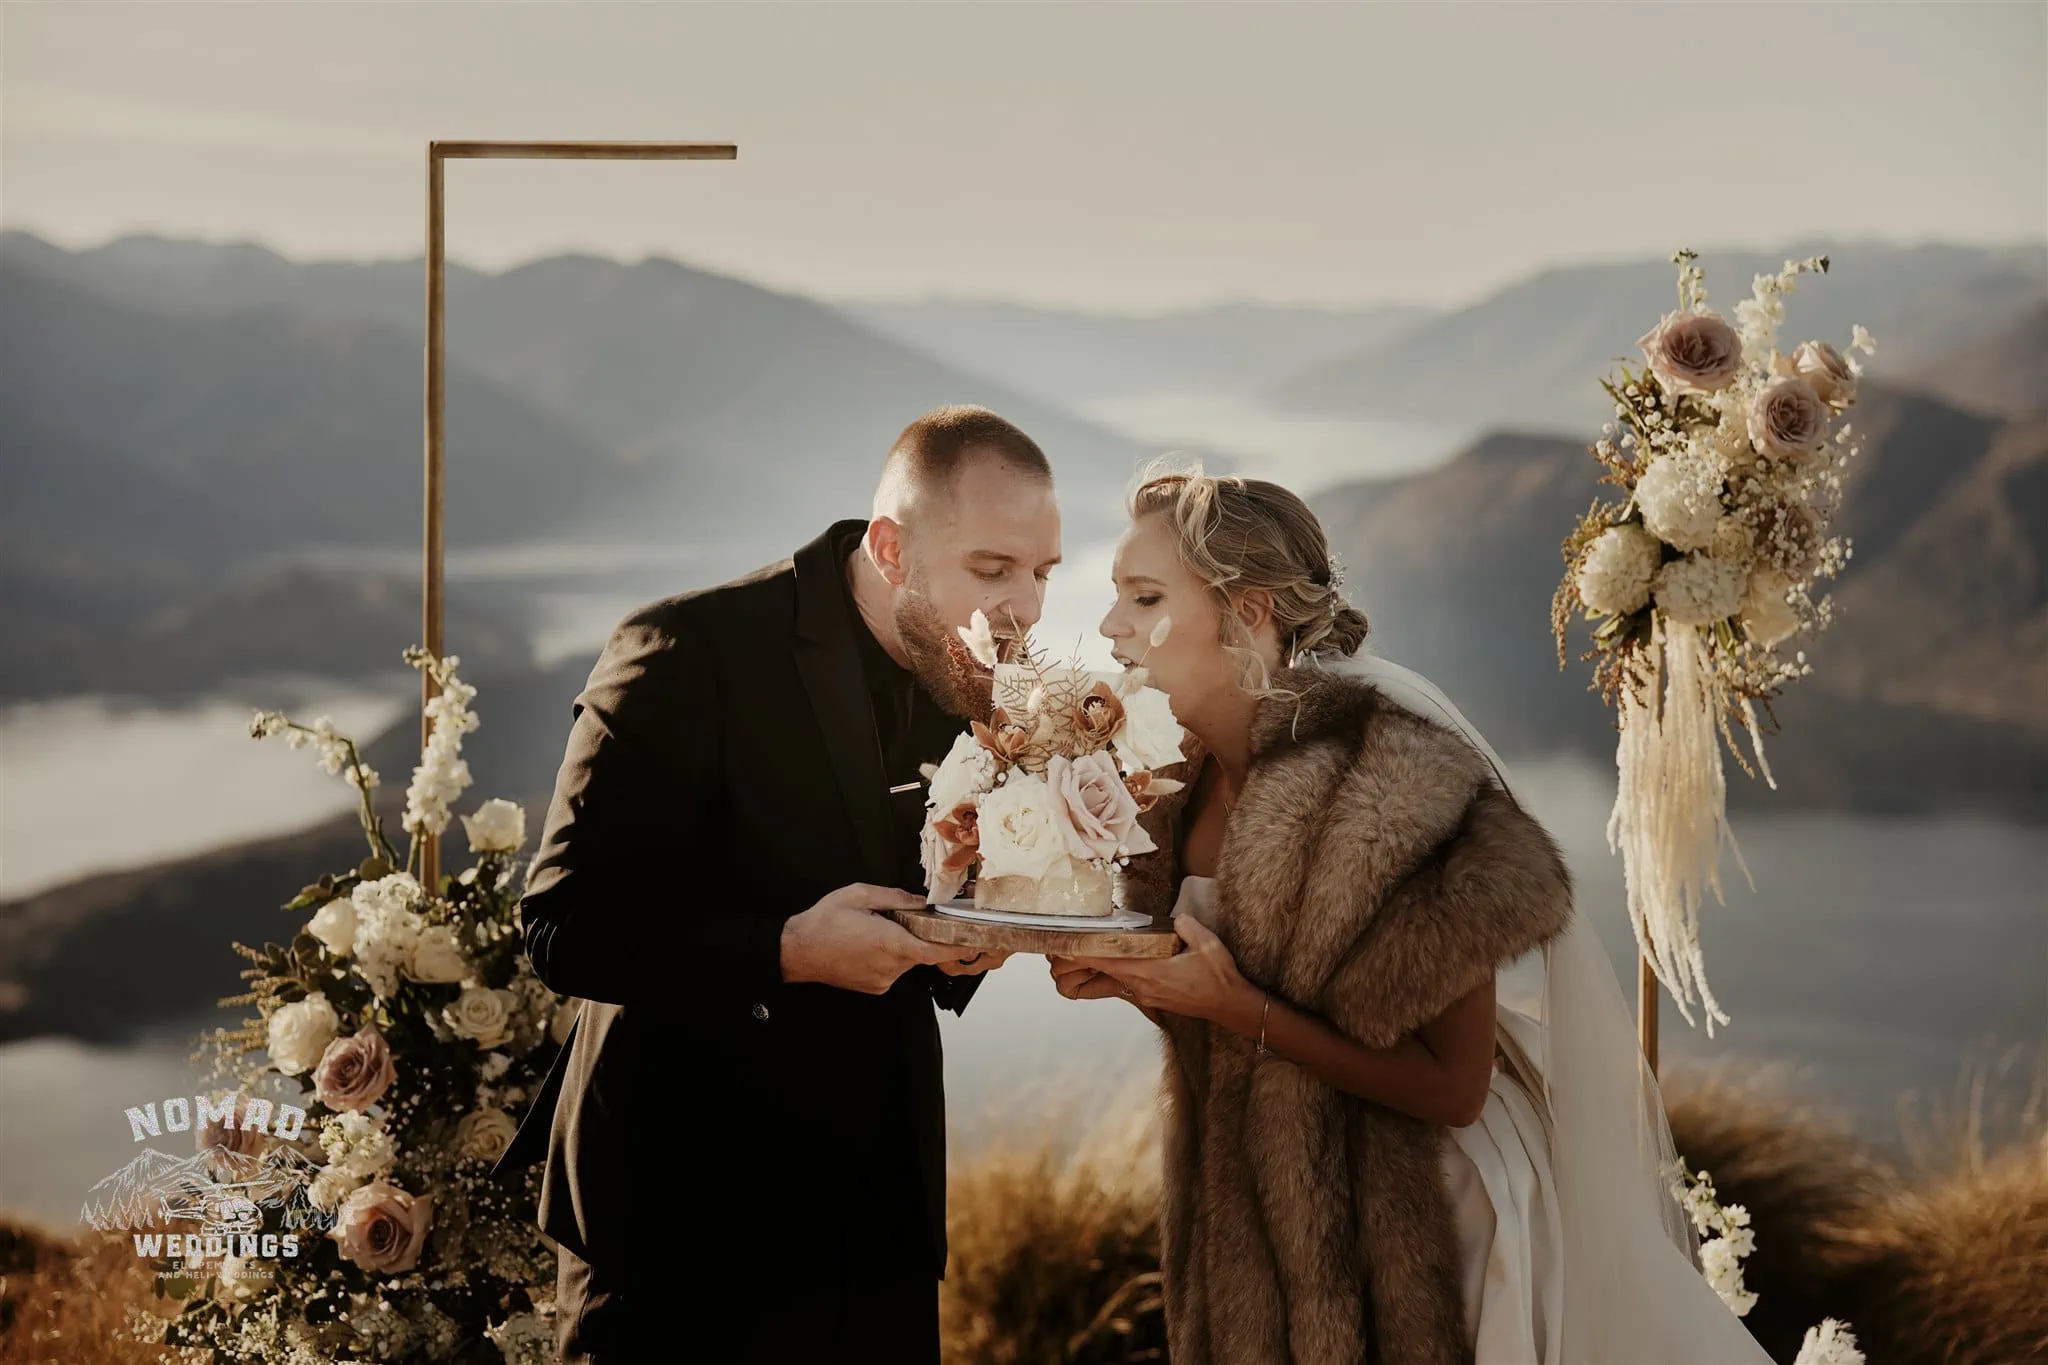 Jay and Dave celebrate their Coromandel Peak Heli Elopement Wedding by sharing a cake on top of a mountain in New Zealand.